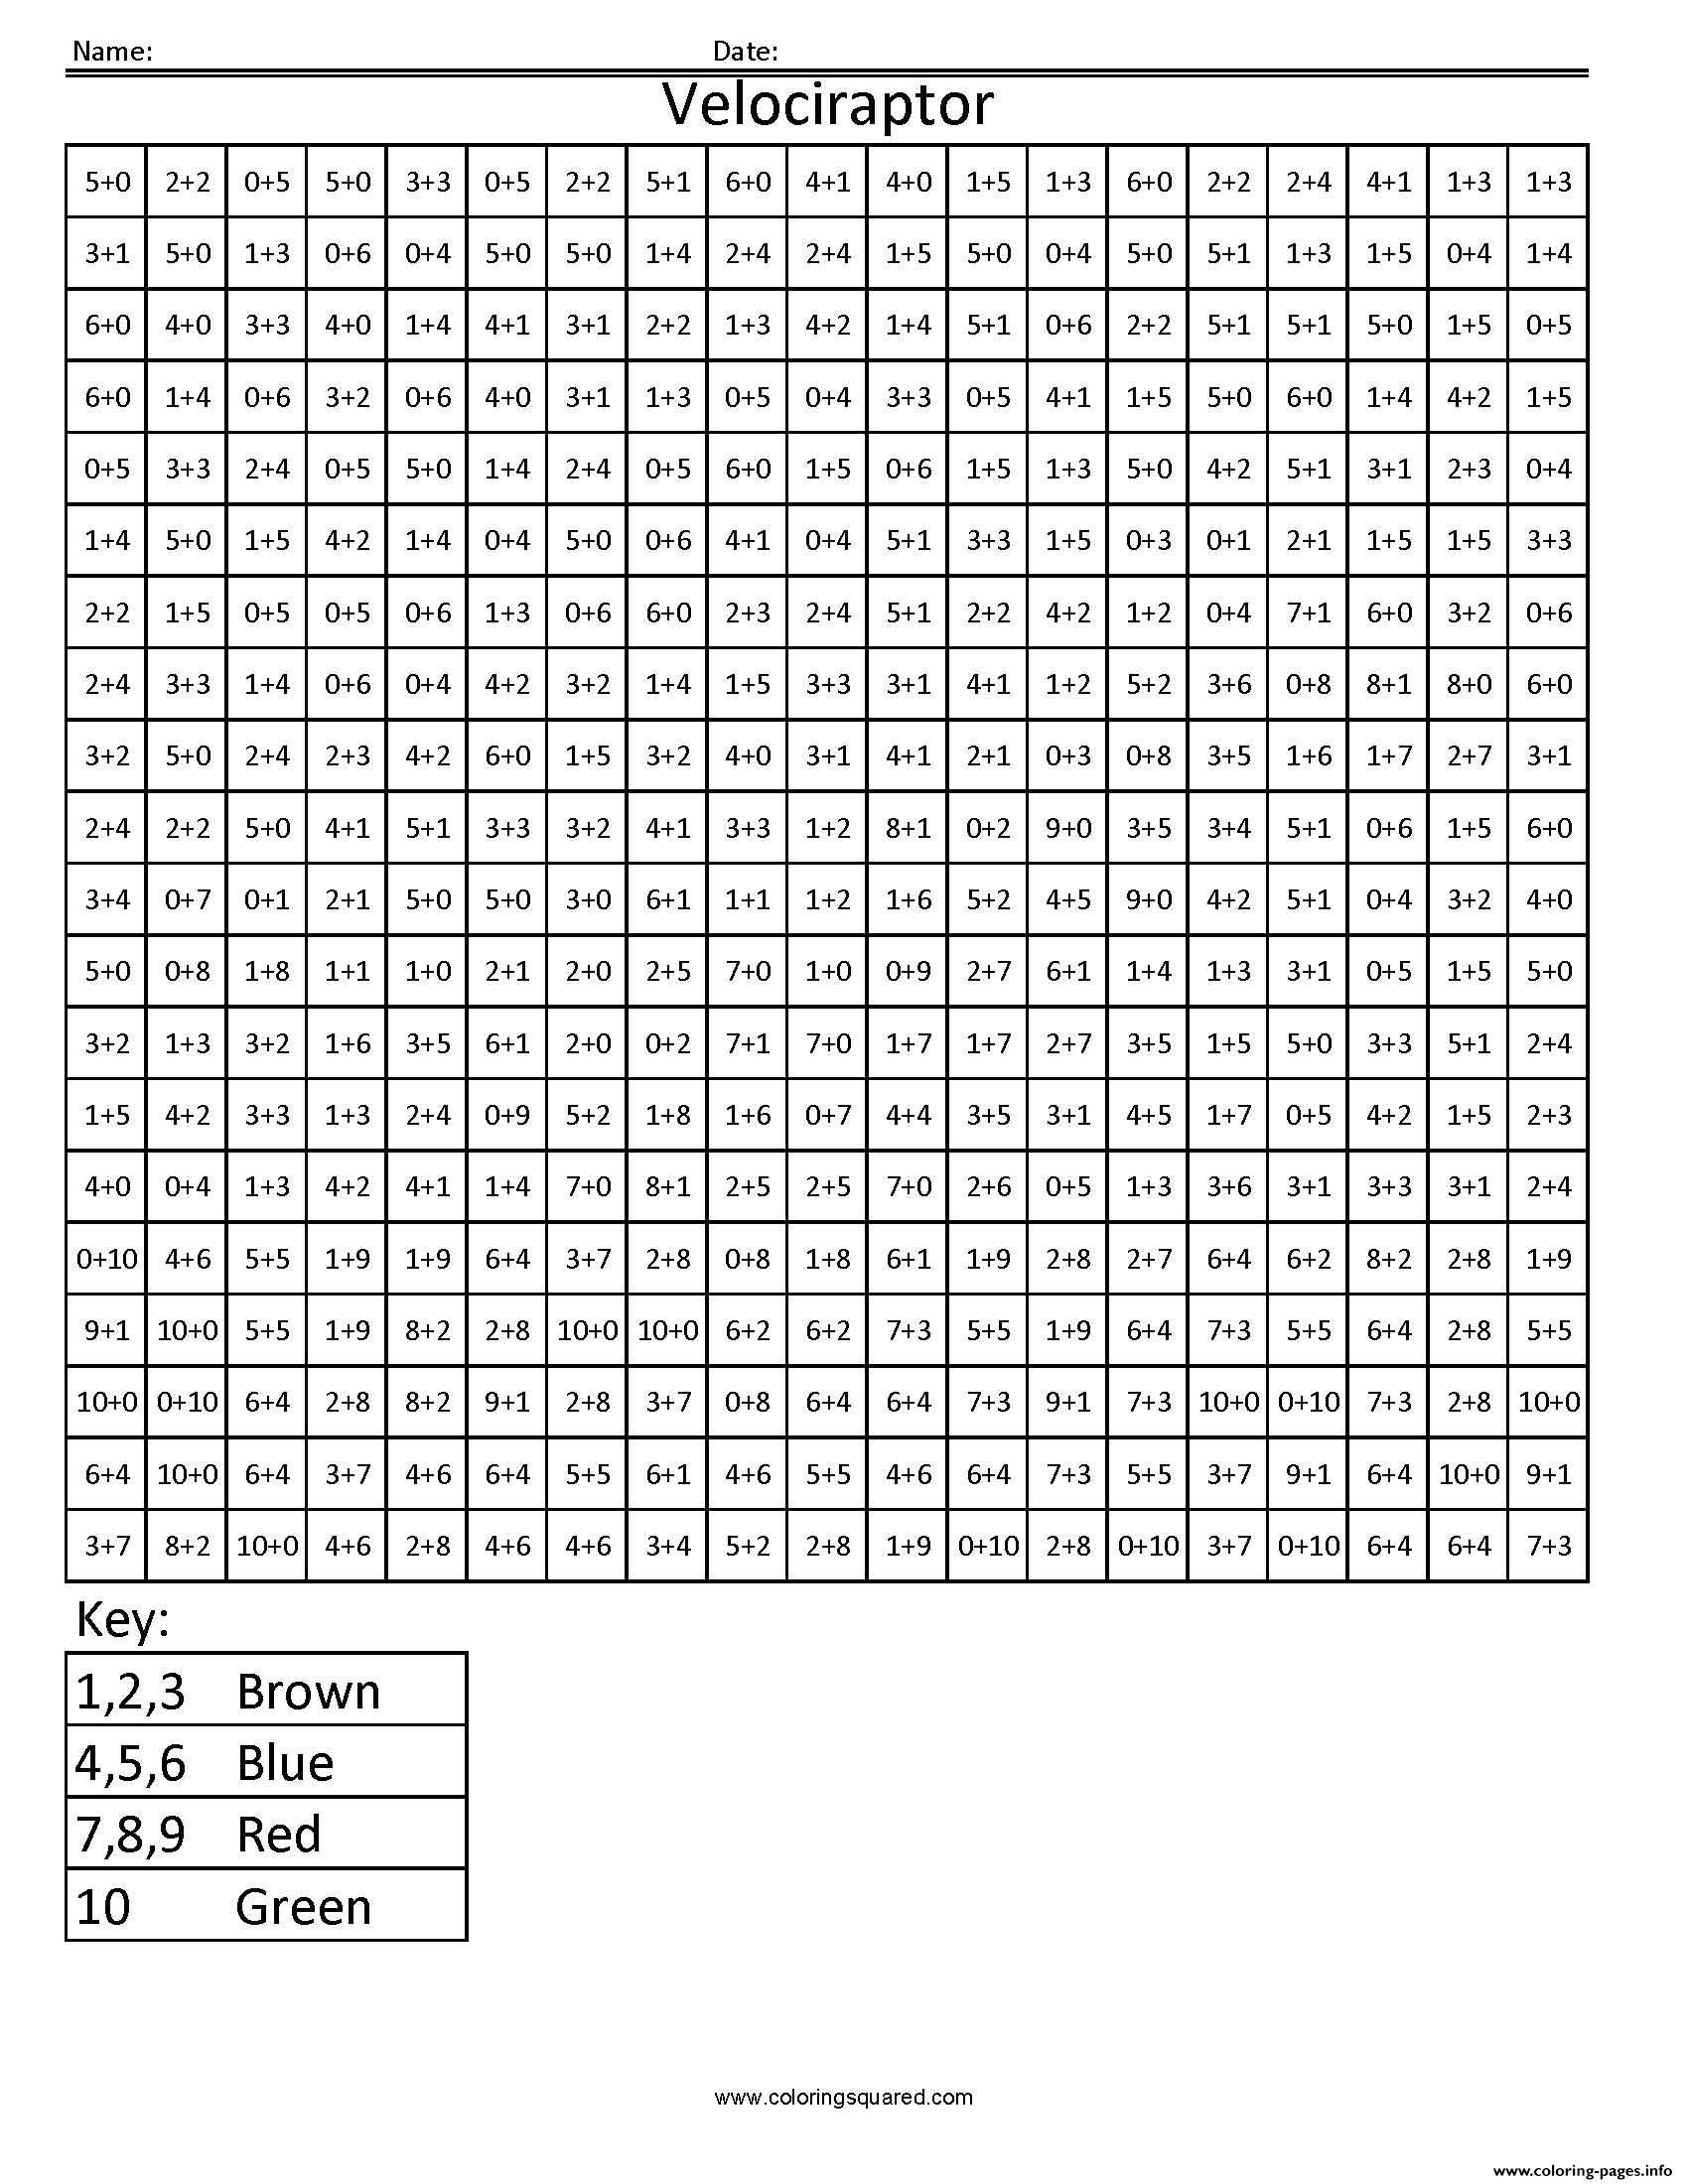 Coloring Squared Worksheets 4 Coloring Squares Subtraction Worksheets In 2020 with